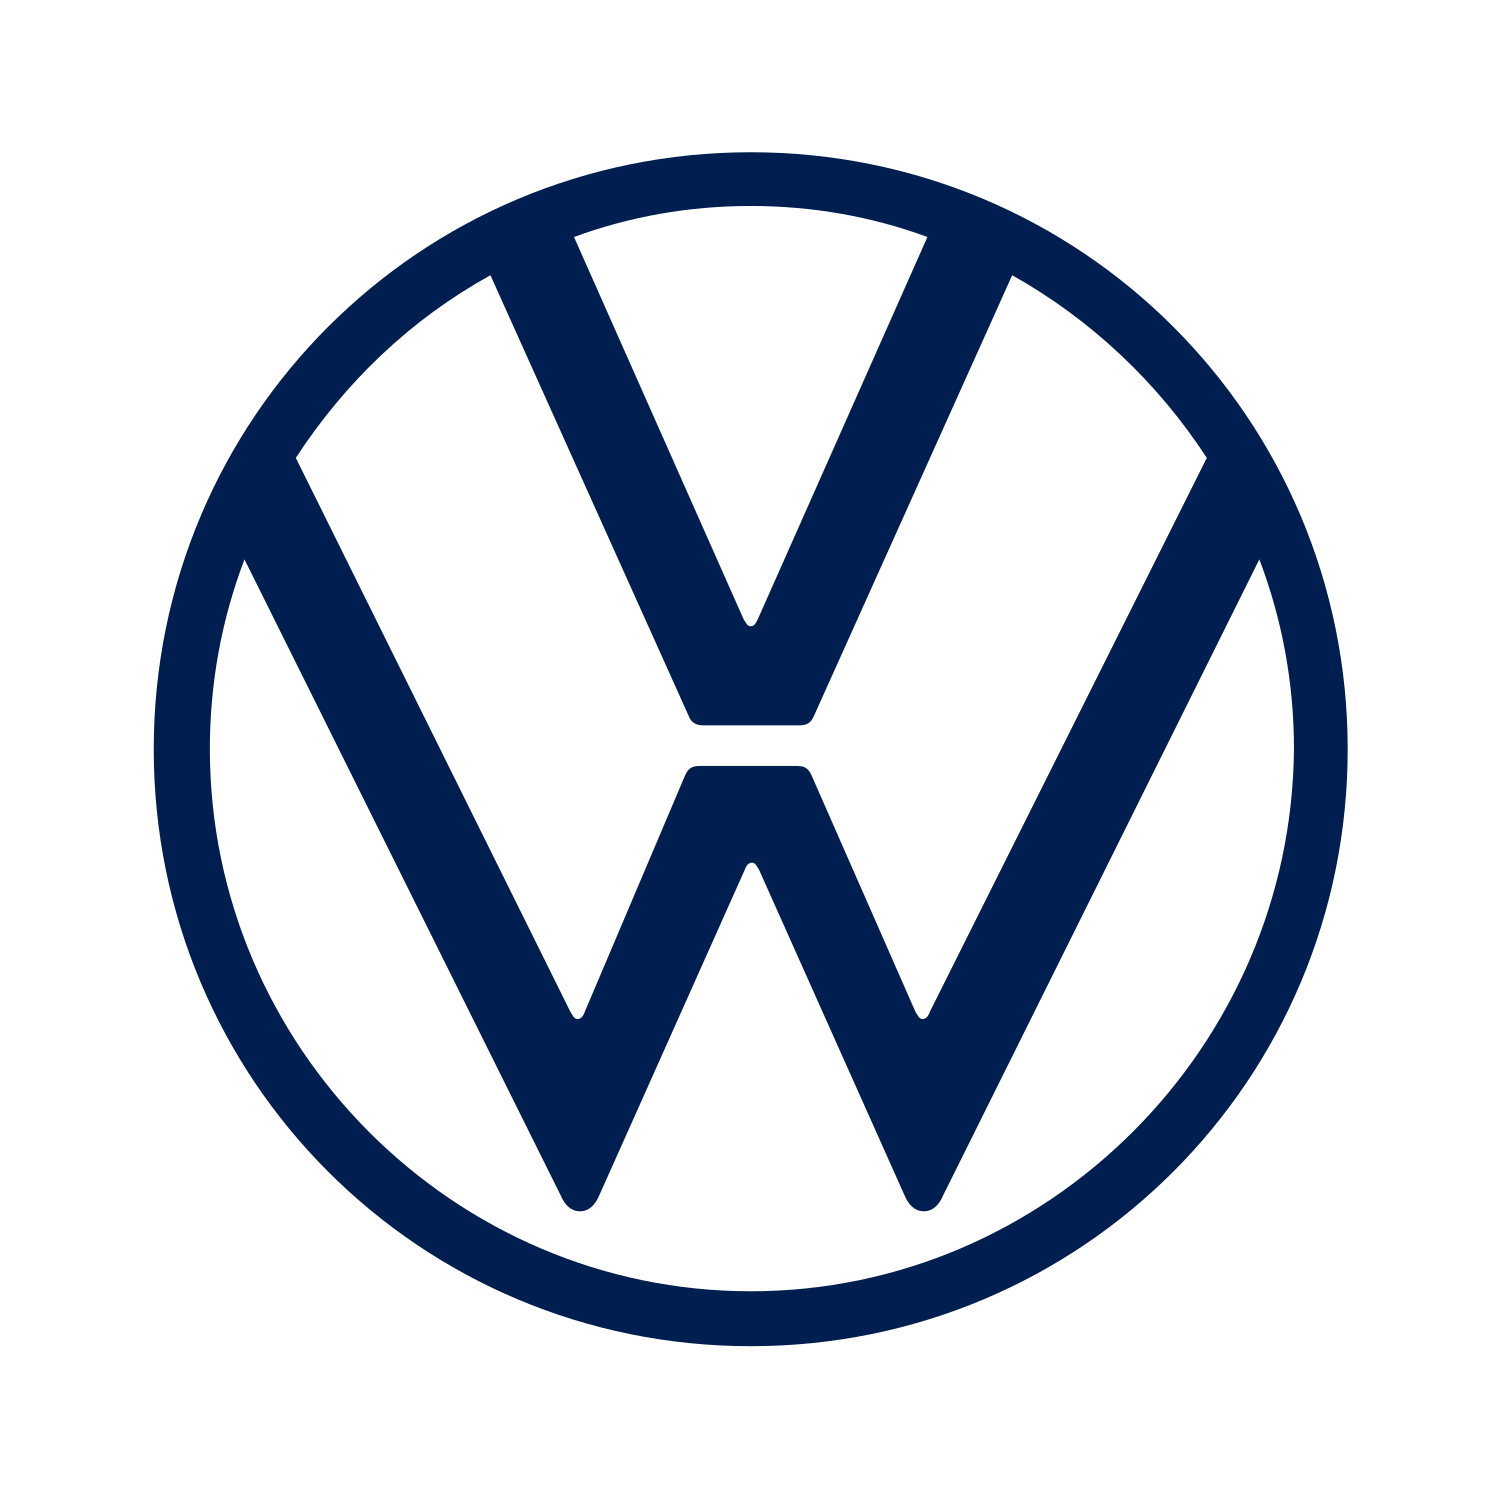 Volkswagen Logo Hd Png Meaning Information